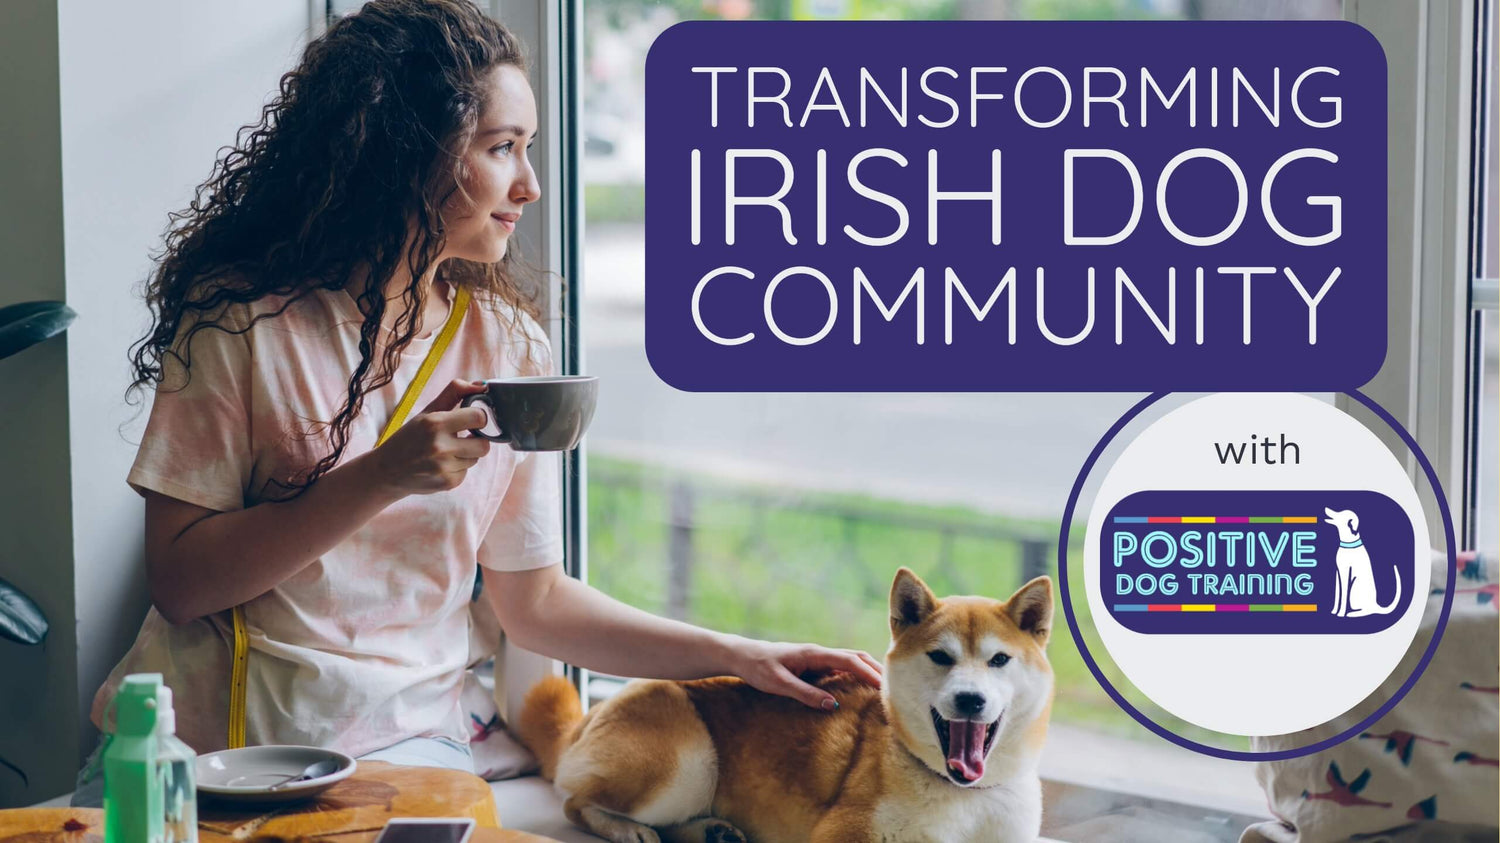 A woman sitting in a window with her dog and drinking coffee and a box with text “Transforming Irish Dog Community”